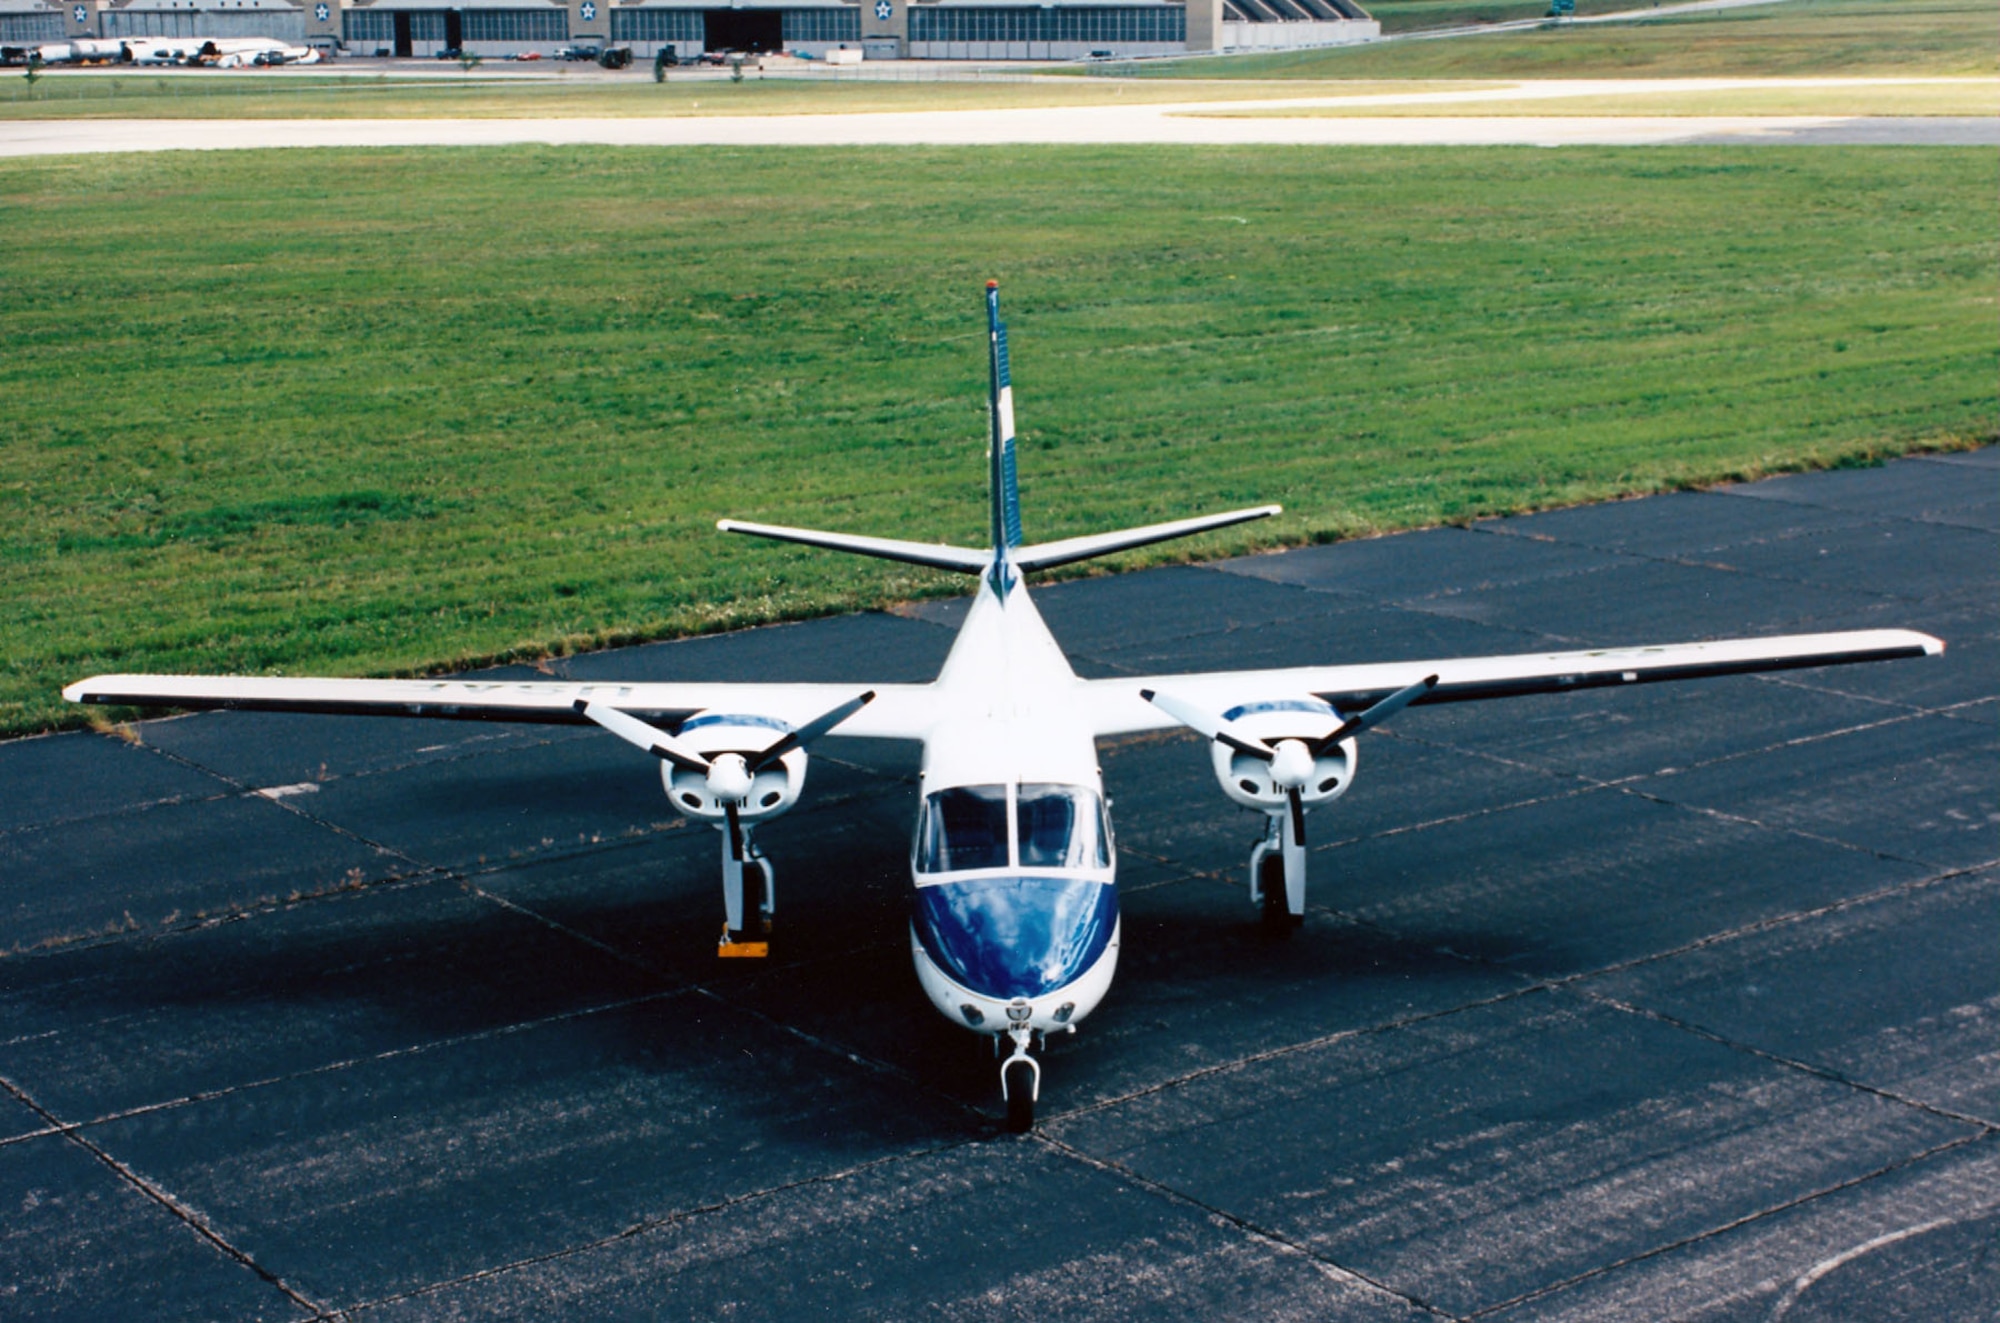 DAYTON, Ohio -- Aero Commander U-4B at the National Museum of the United States Air Force. (U.S. Air Force photo)